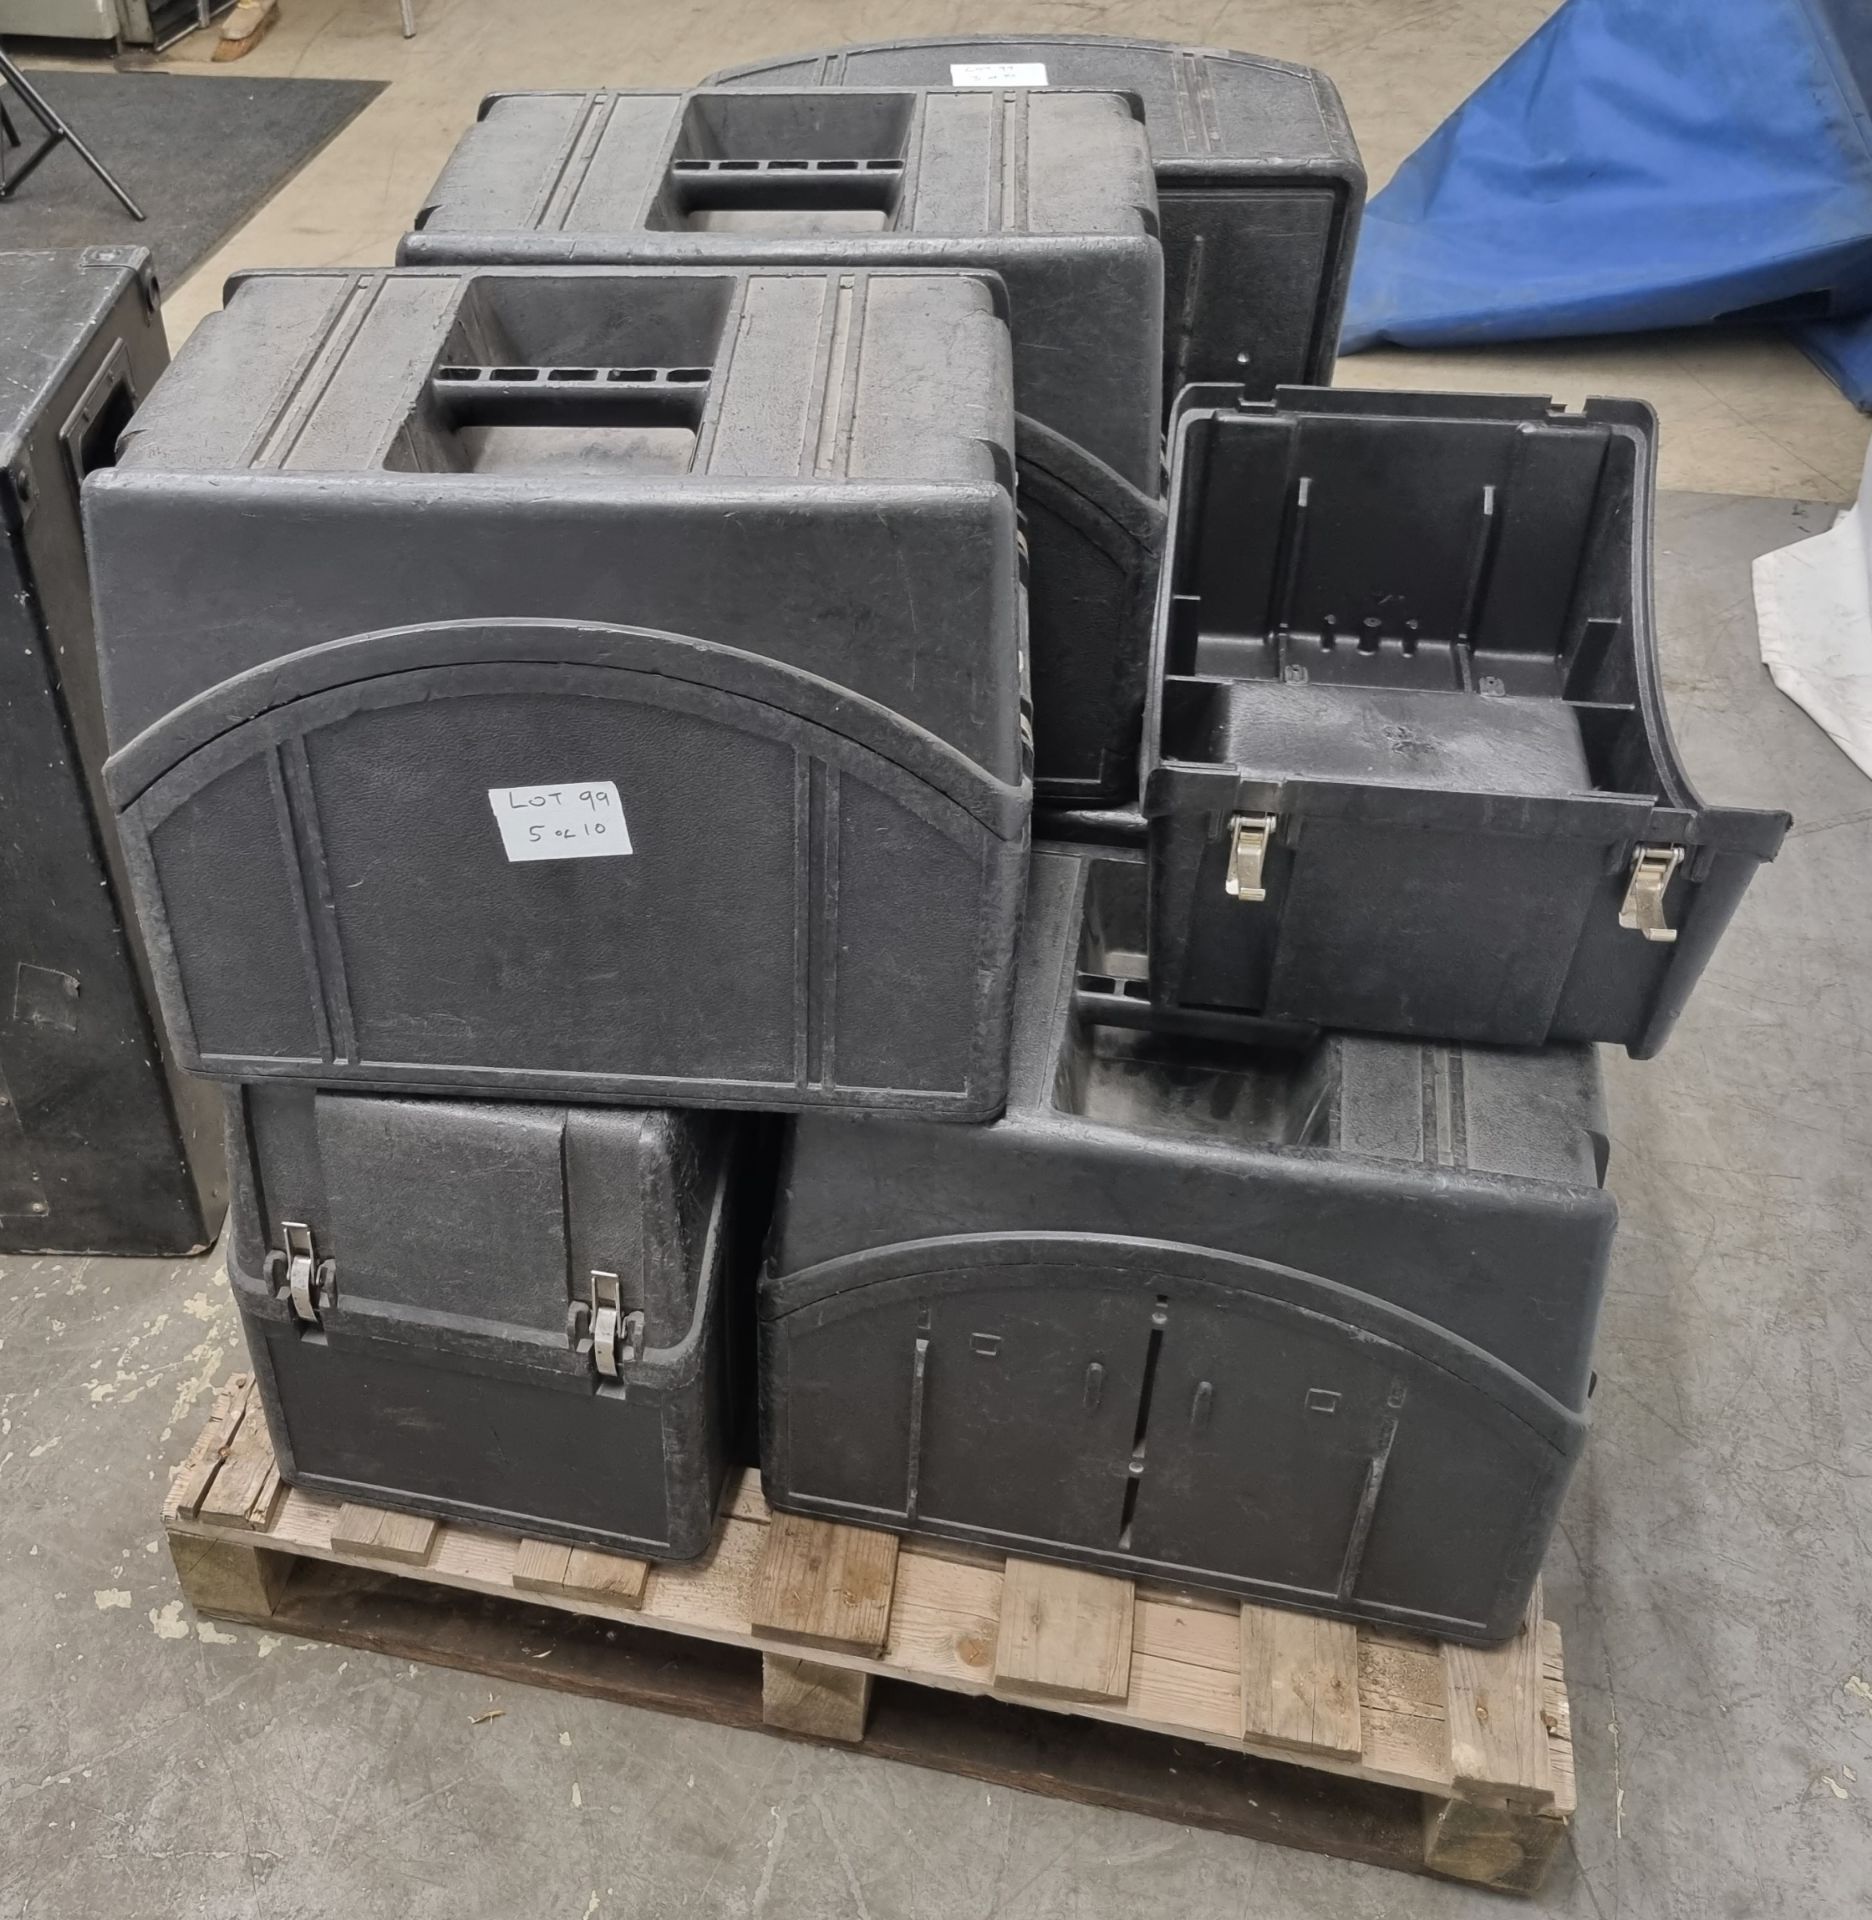 8x BOSE 802 series 2 speakers in cases, 2x BOSE 302 subwoofers with covers - Bild 3 aus 10